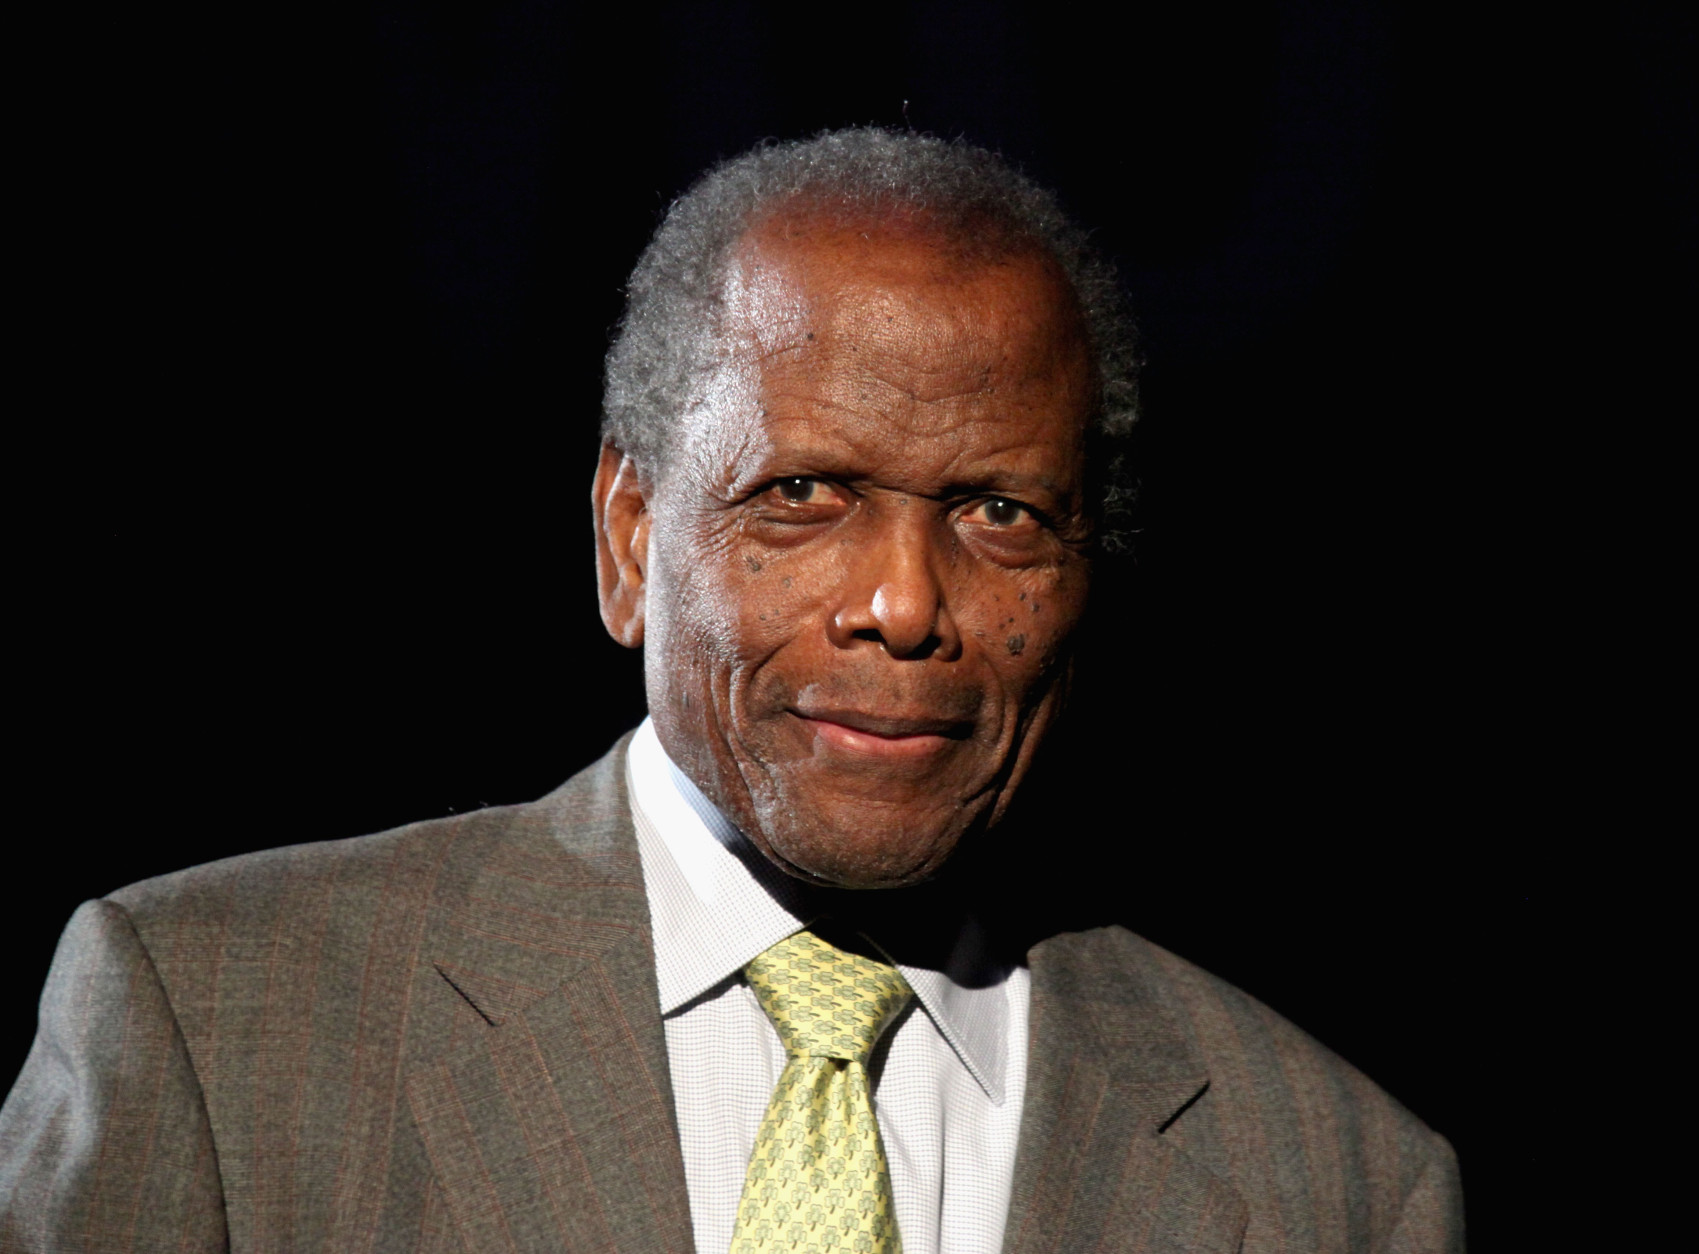 HOLLYWOOD, CA - APRIL 24: Actor Sidney Poitier presenting "In the Heat of the Night" at Target Presents AFI's Night at the Movies at ArcLight Cinemas on April 24, 2013 in Hollywood, California.  (Photo by Tommaso Boddi/Getty Images for AFI)